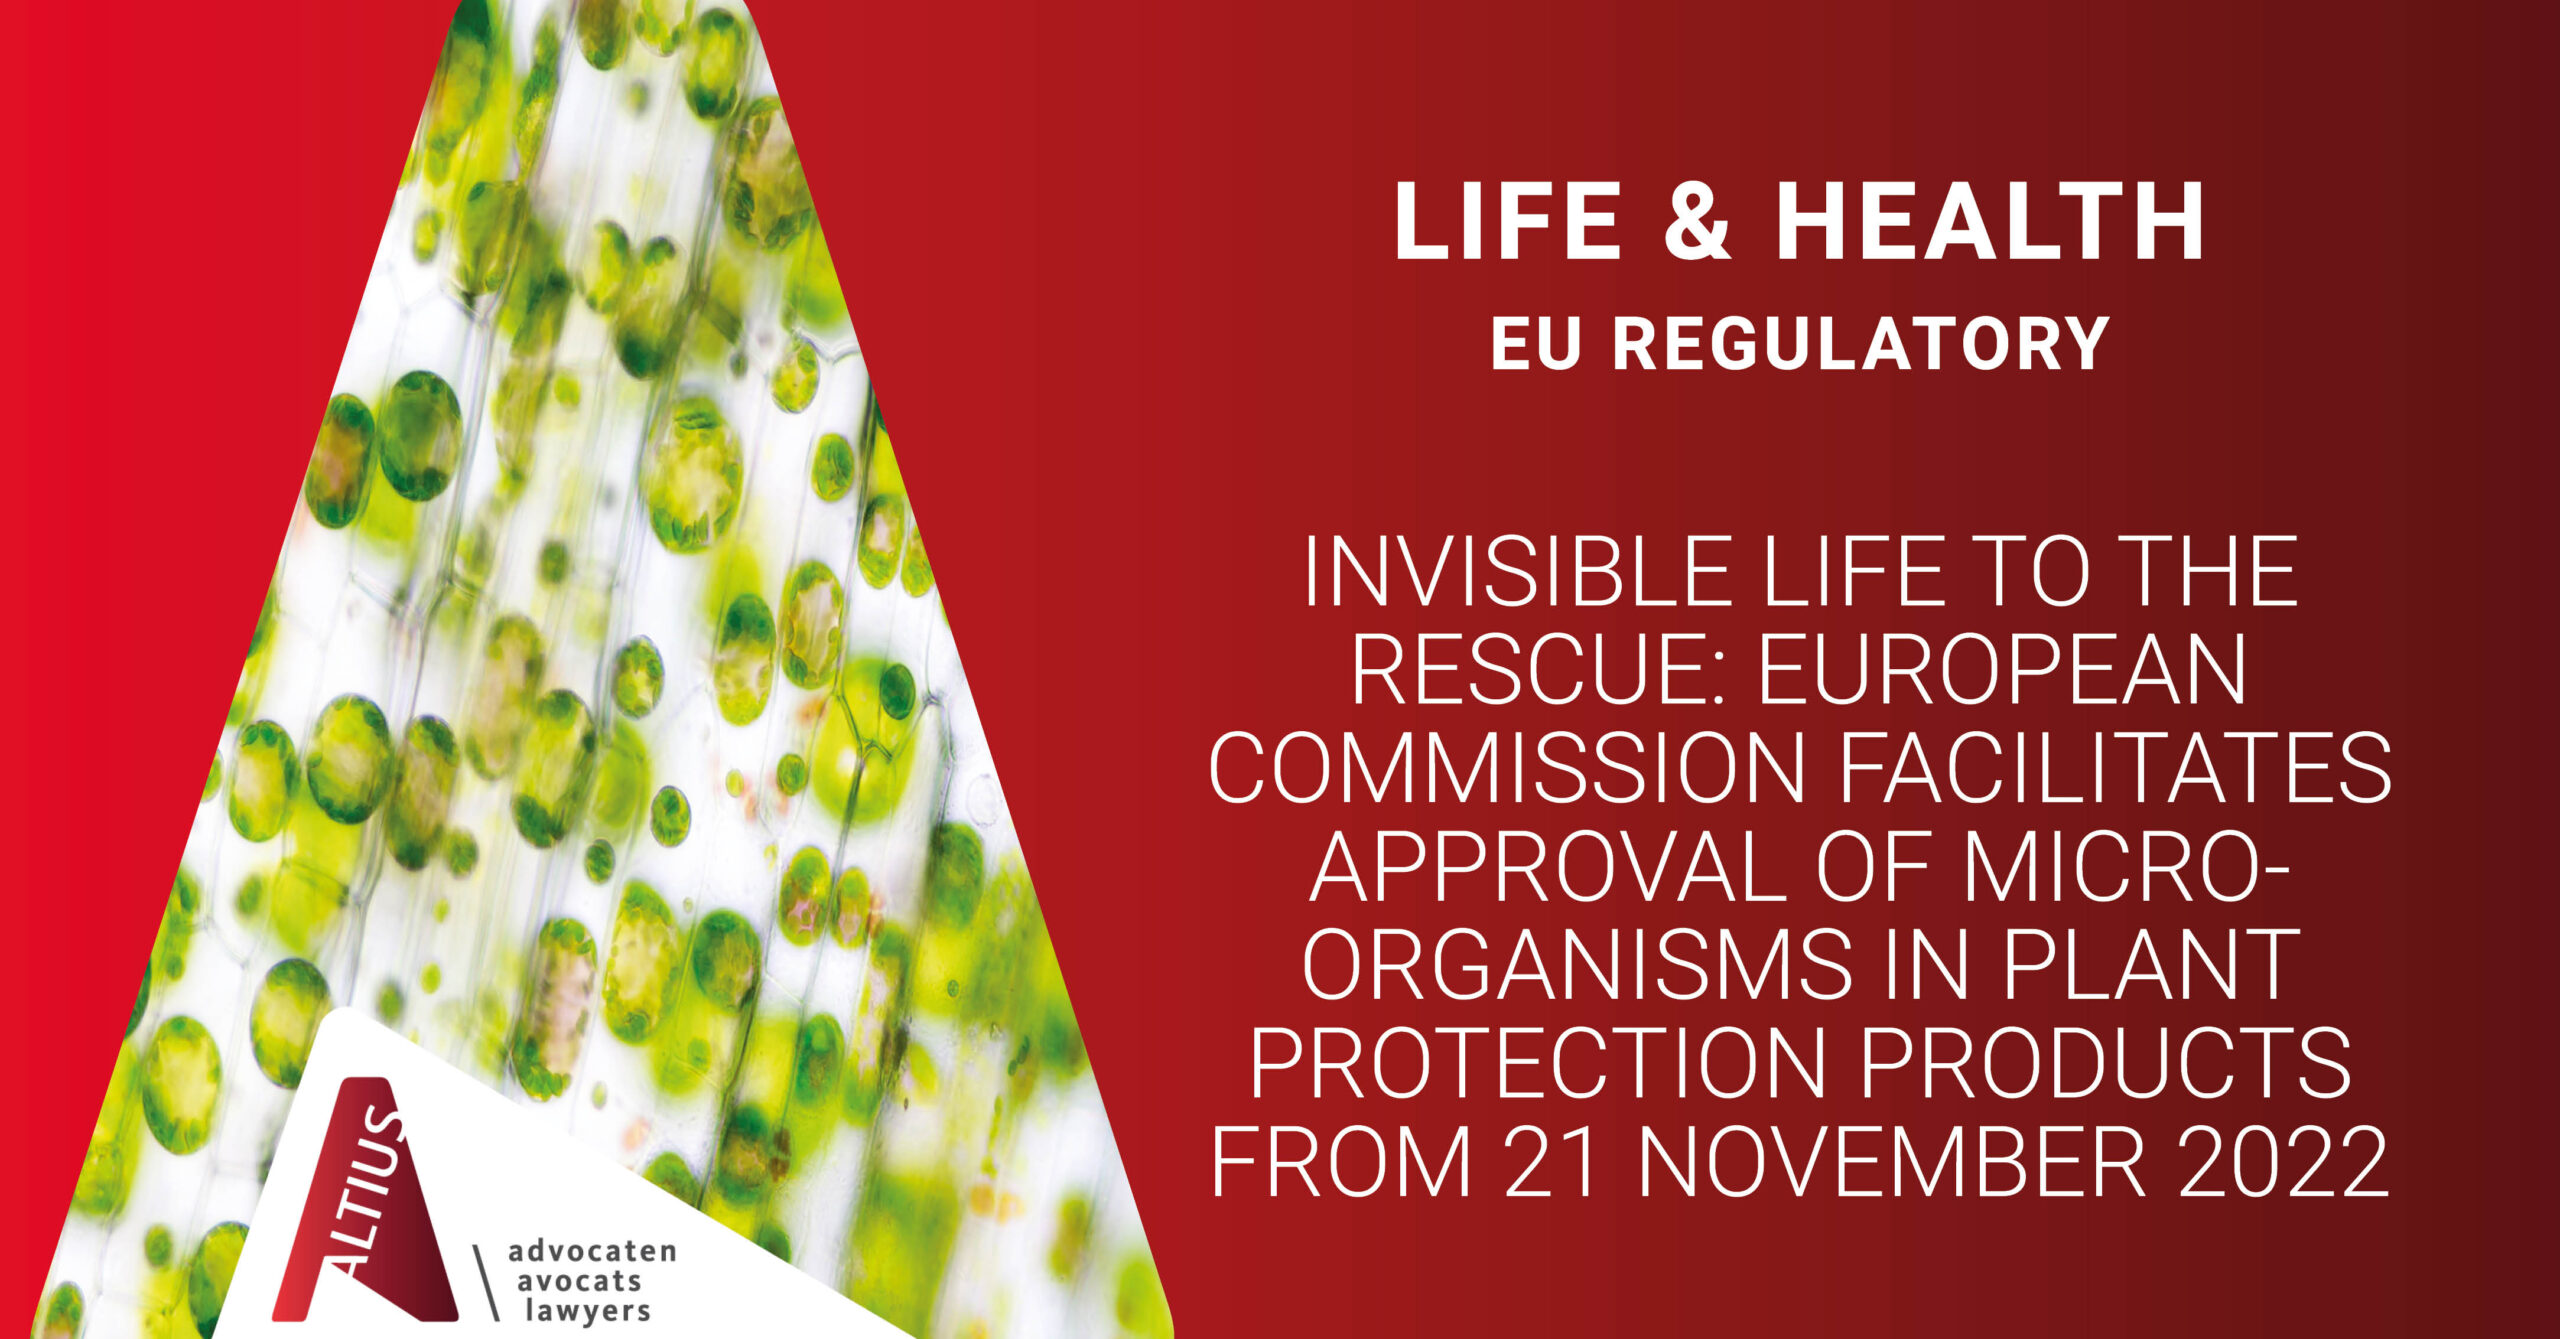 Invisible life to the rescue: European Commission facilitates approval of micro-organisms in plant protection products from 21 November 2022